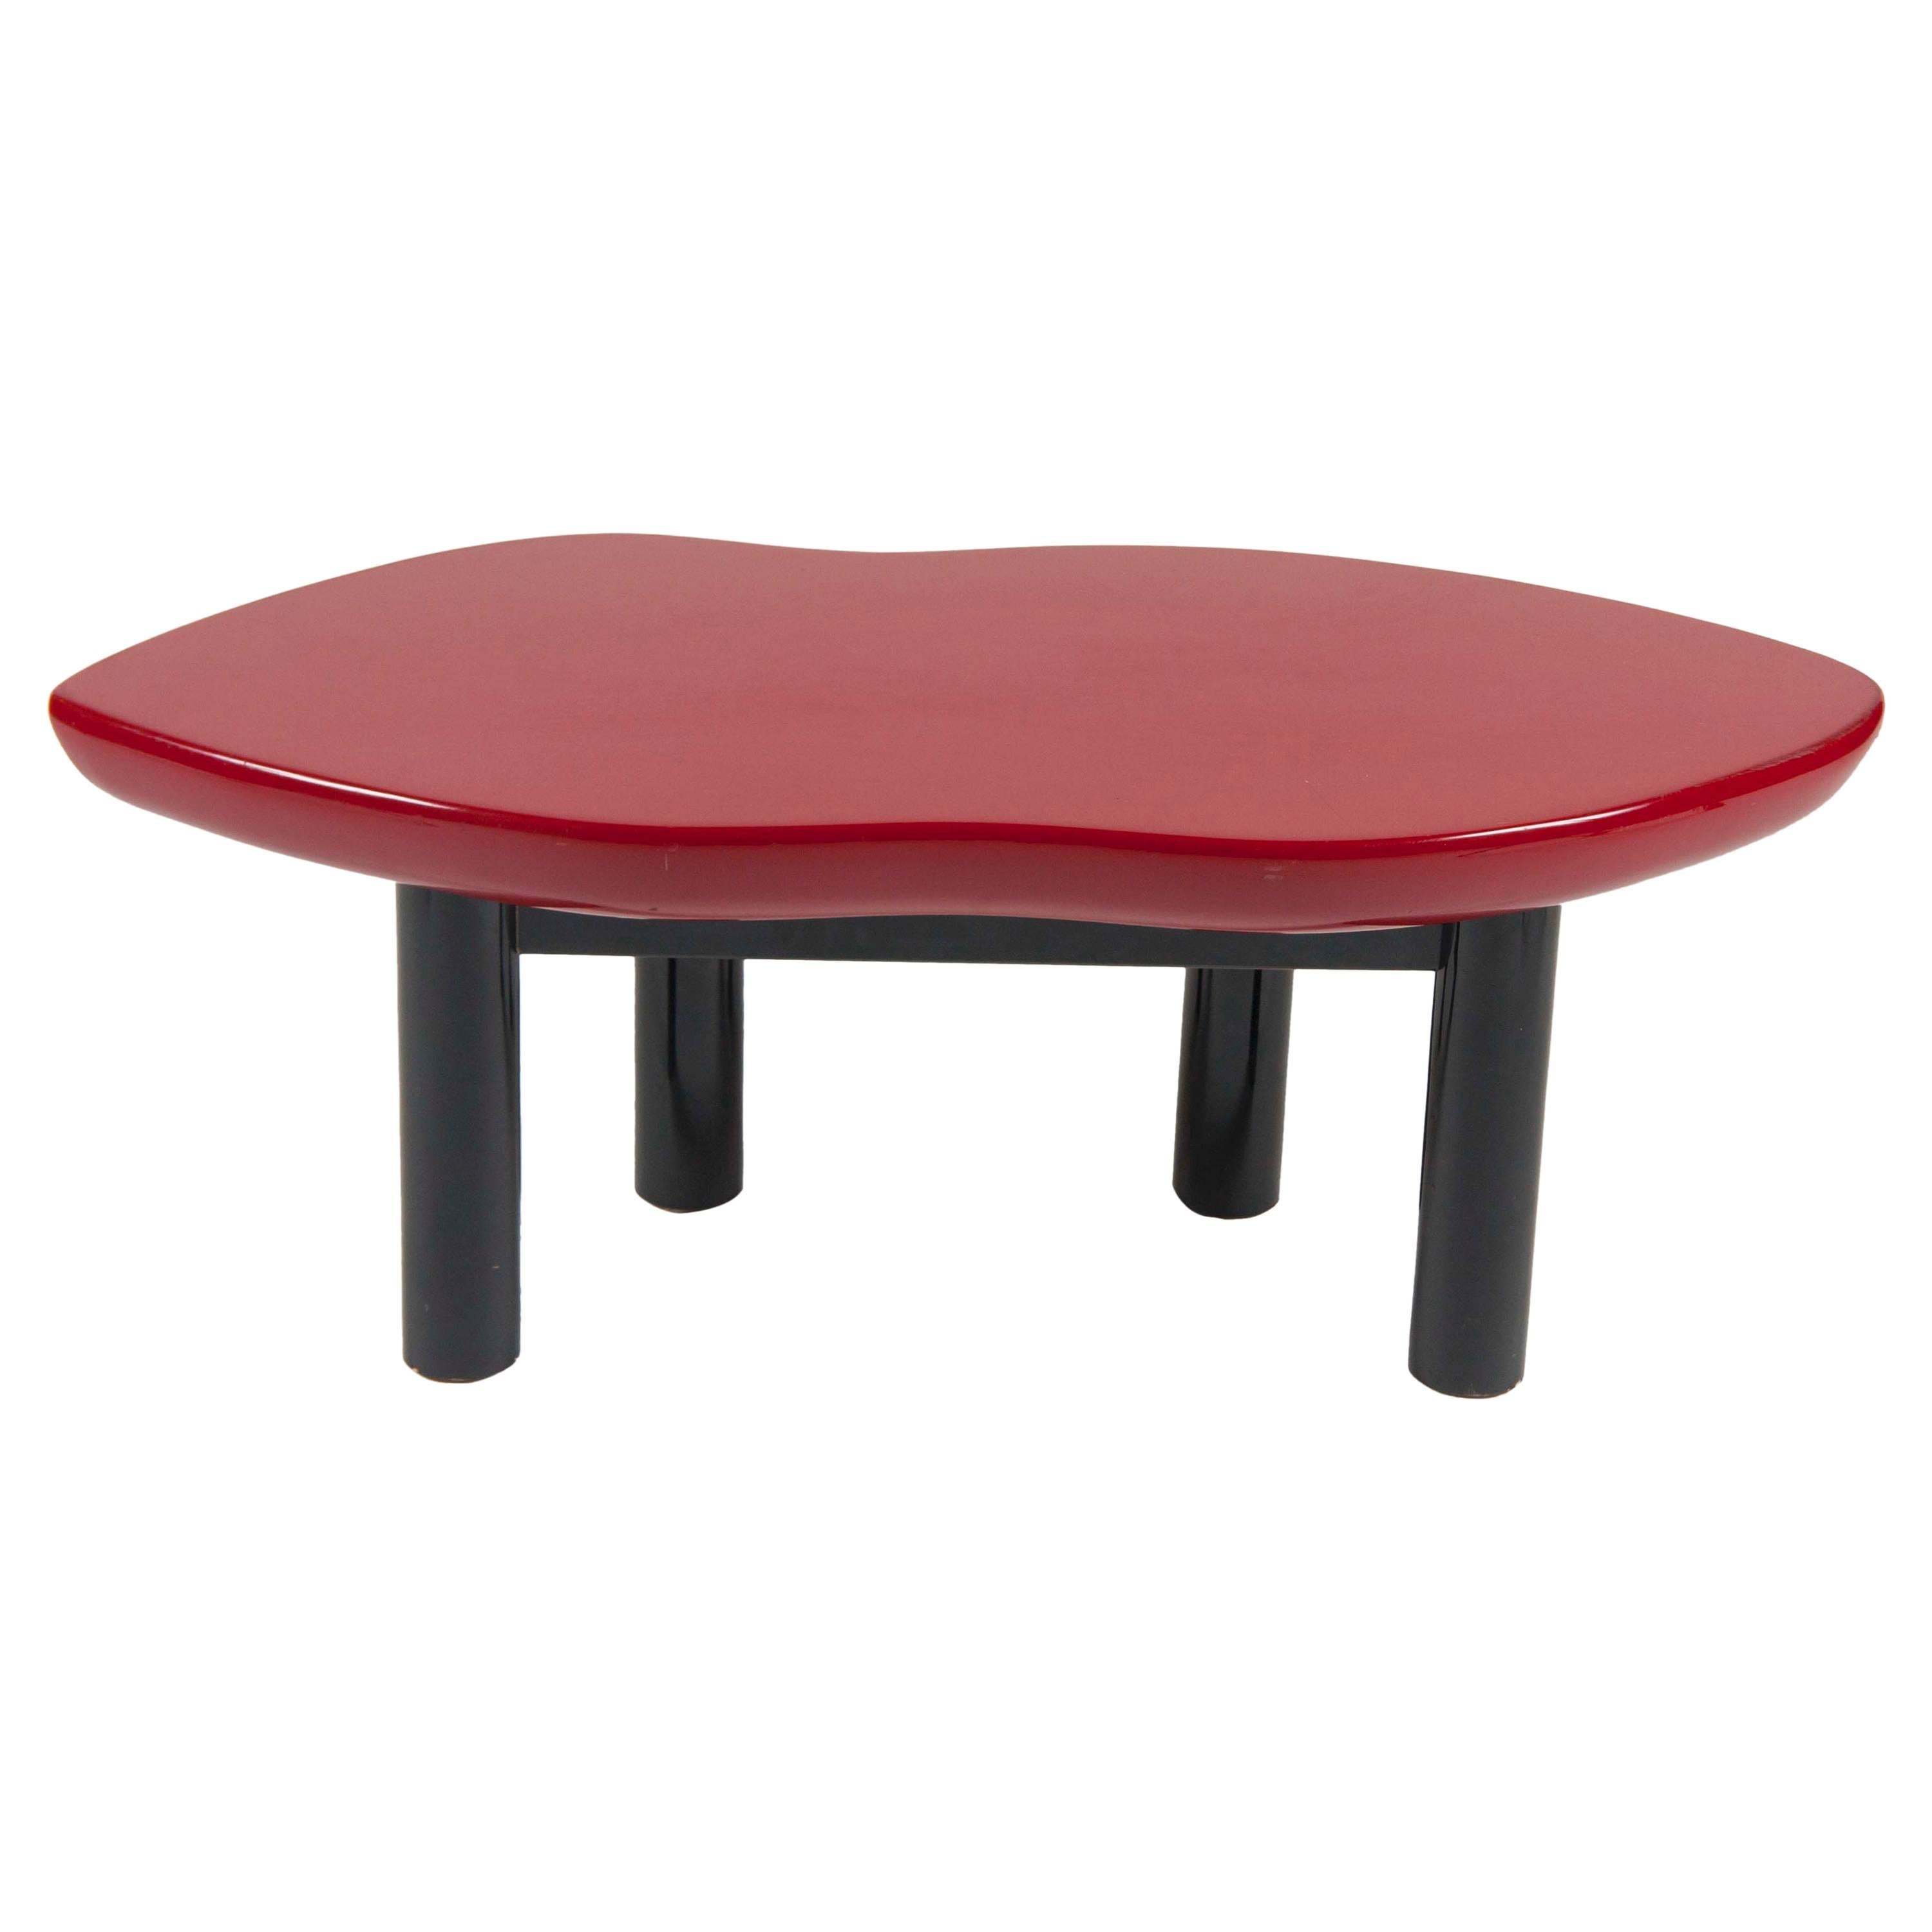 Joan Crawford Lips Lacquered Coffee Table by Jay Spectre For Sale